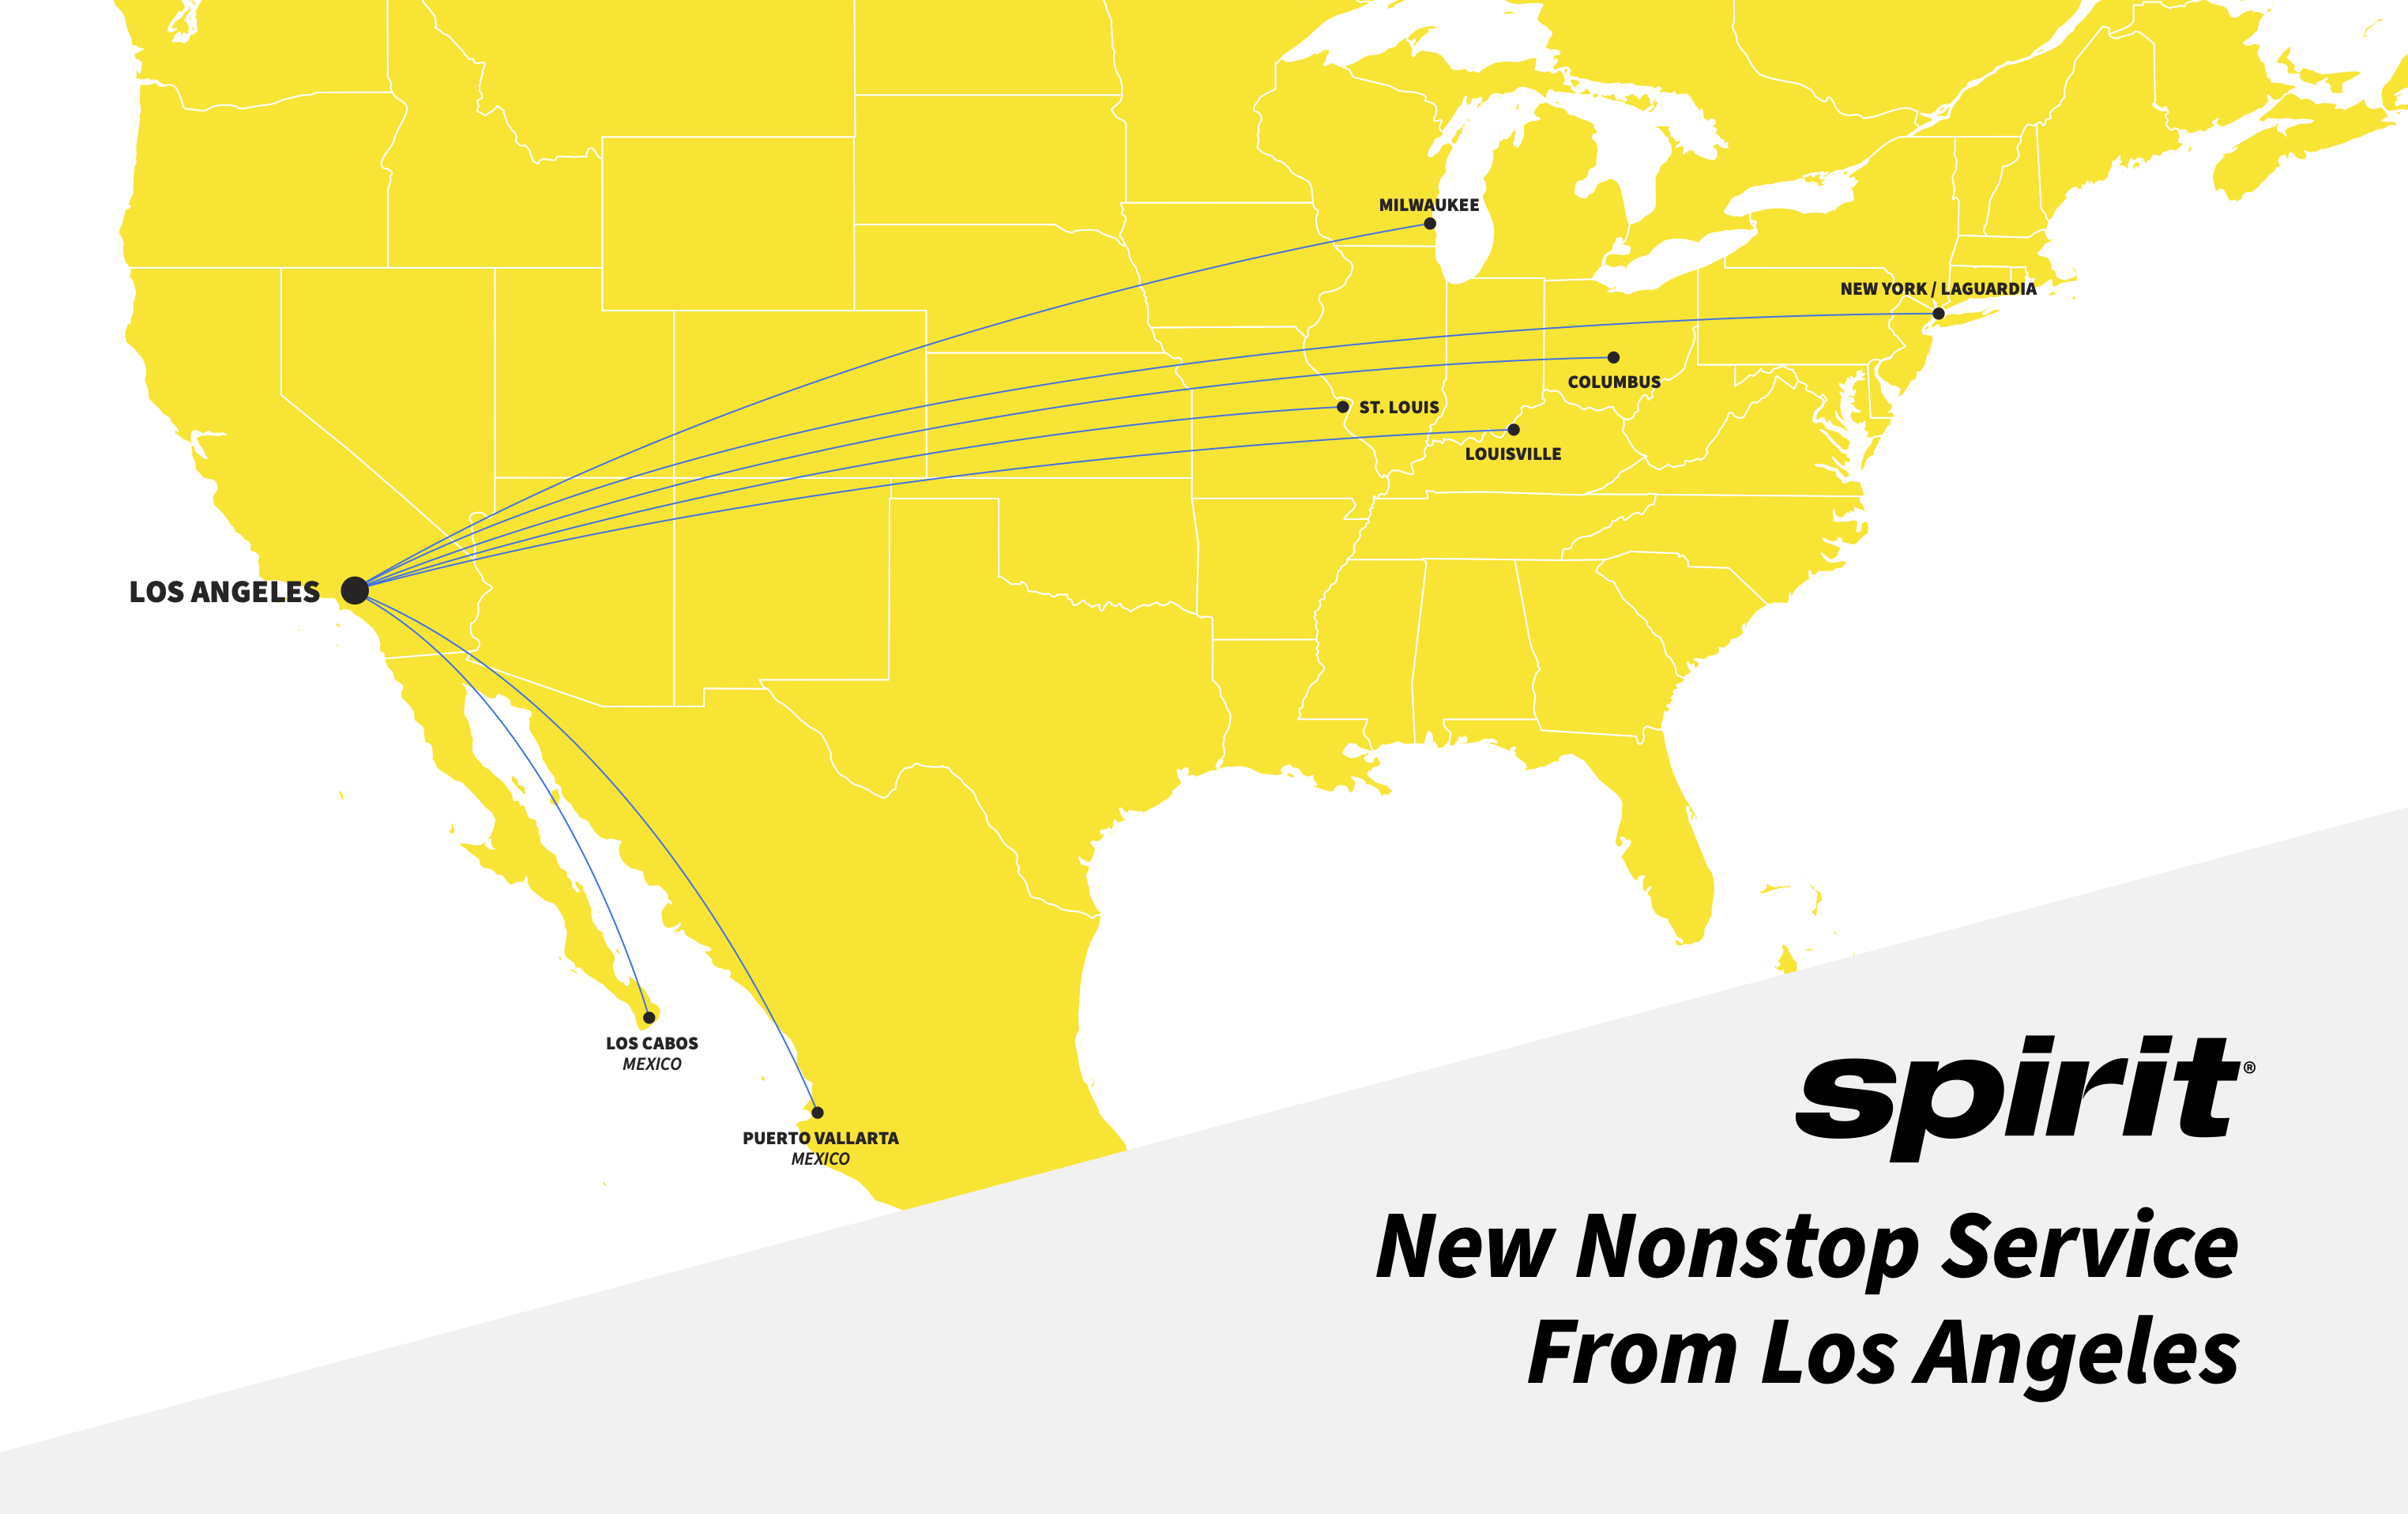 Spirit Airlines Adds New International and Domestic Routes Miles to